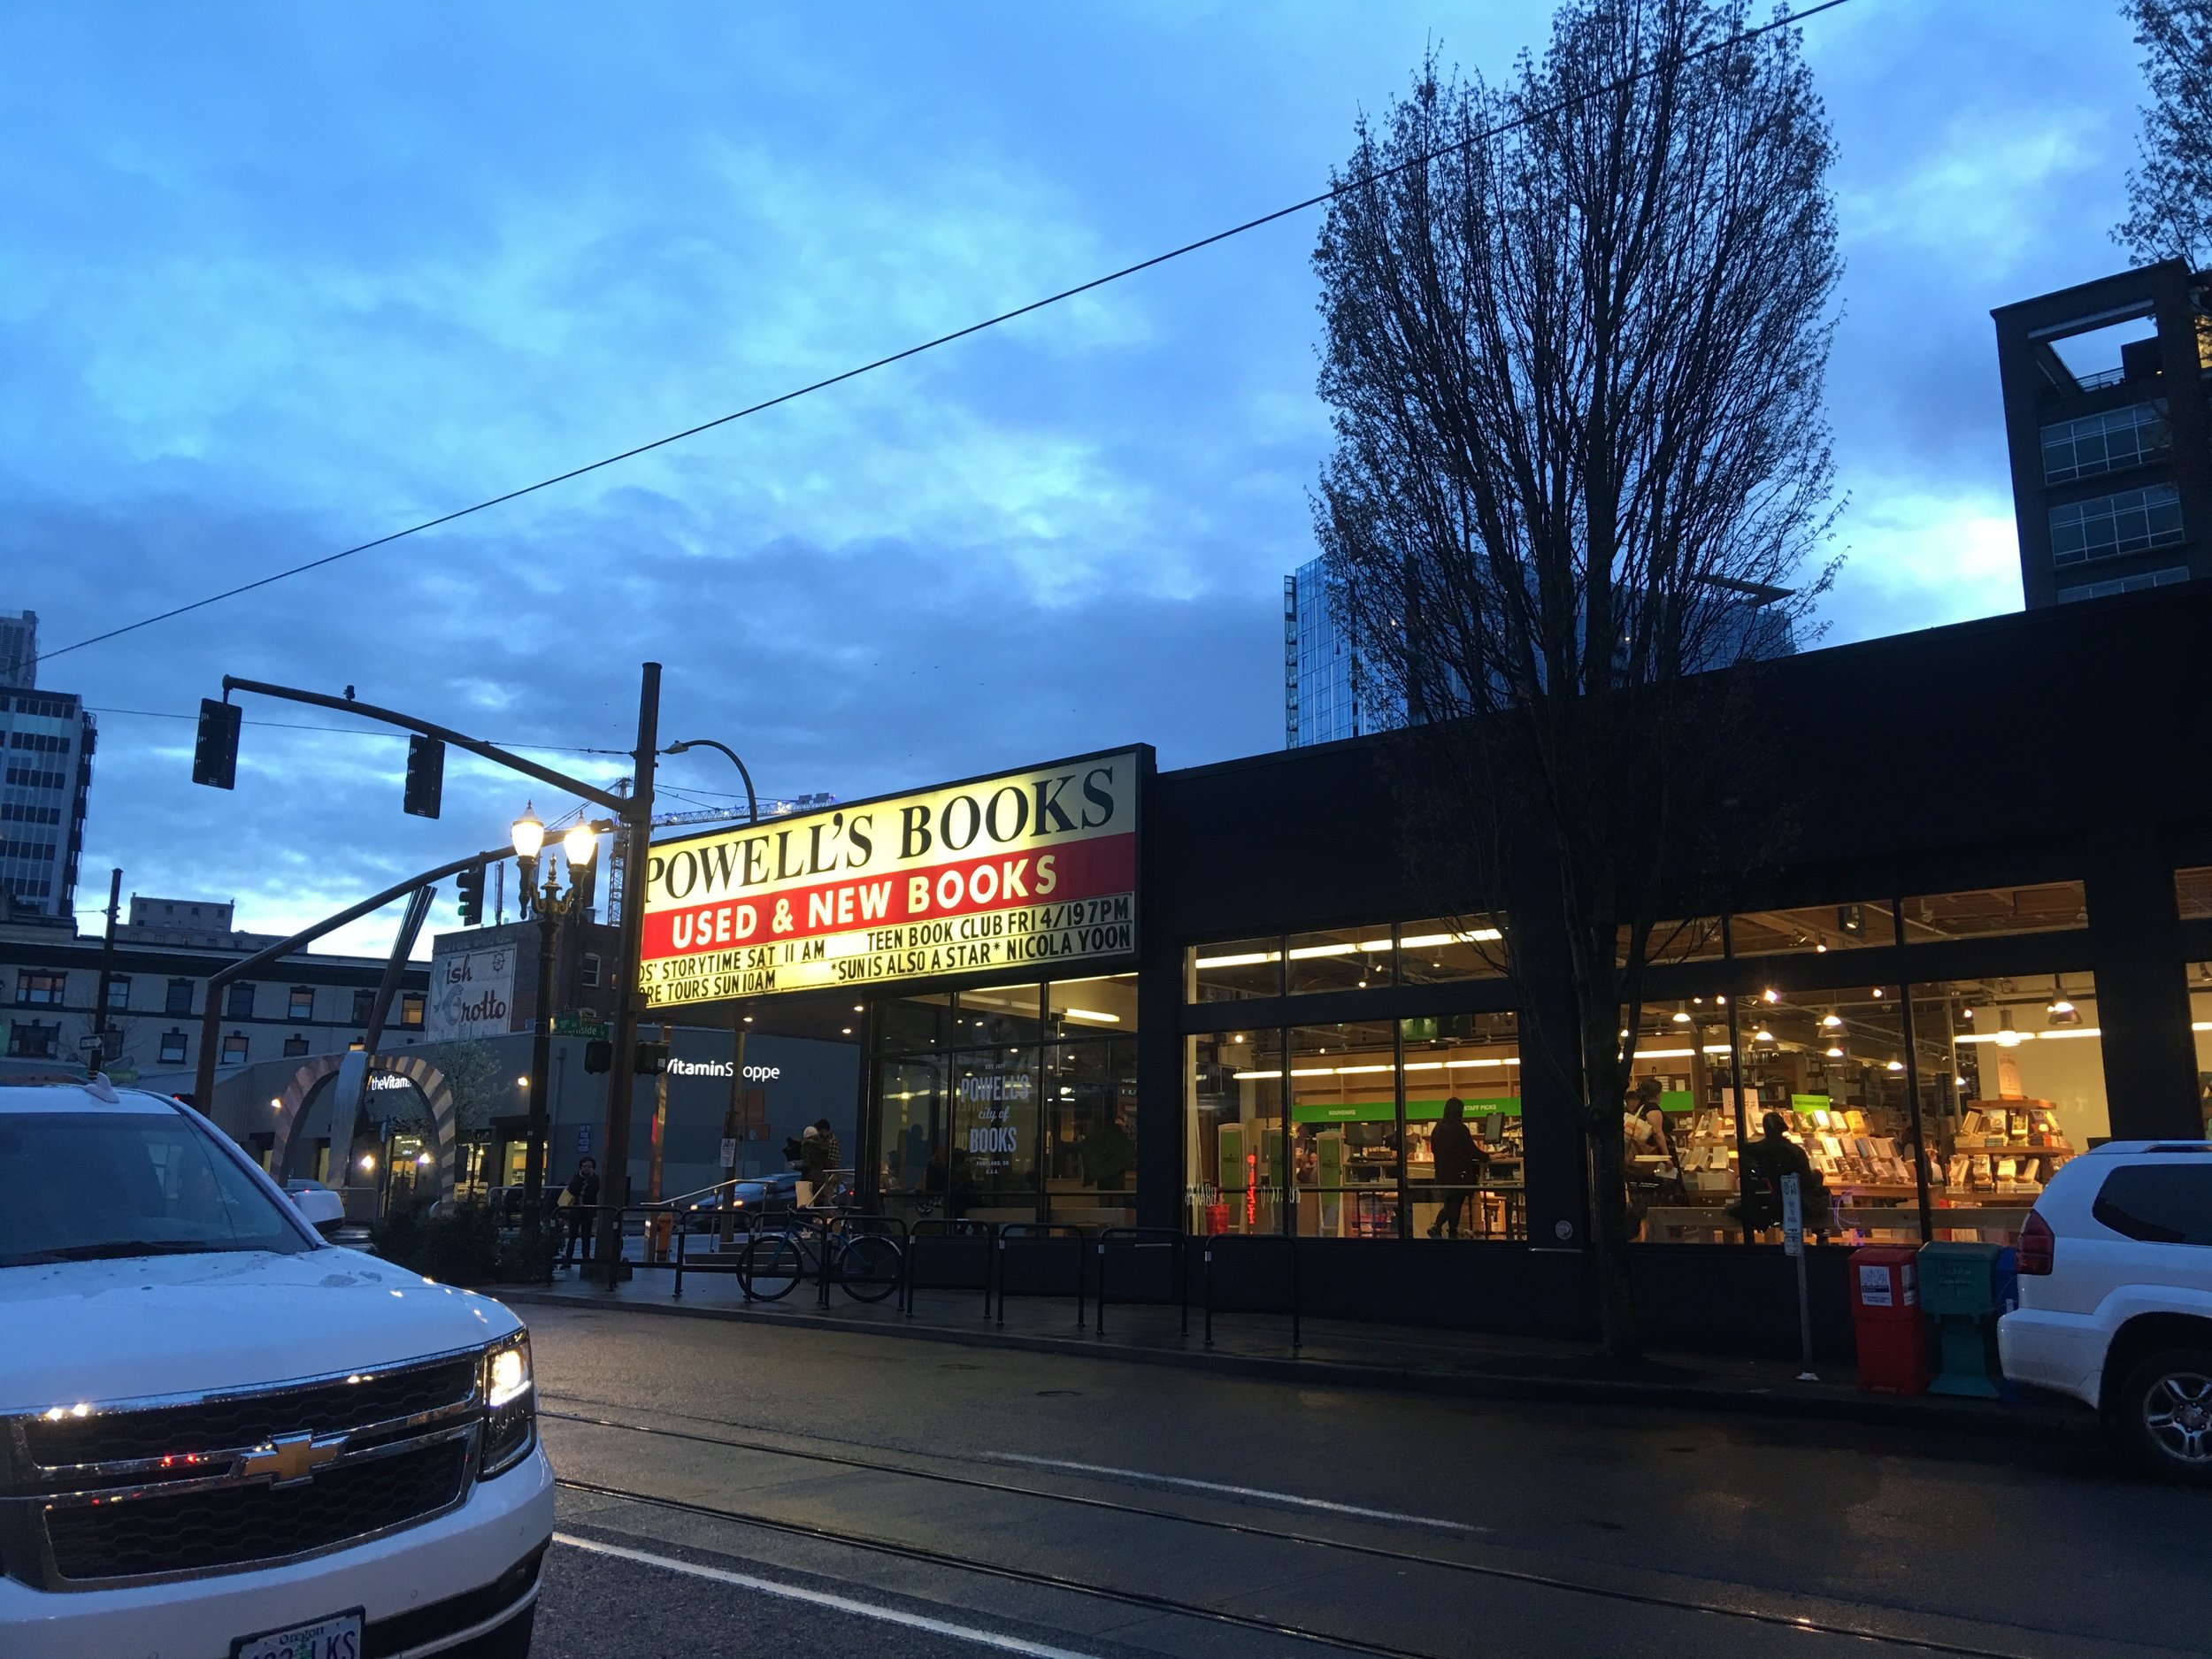  The biggest indie bookstore in the U.S. - we love Powell’s! 